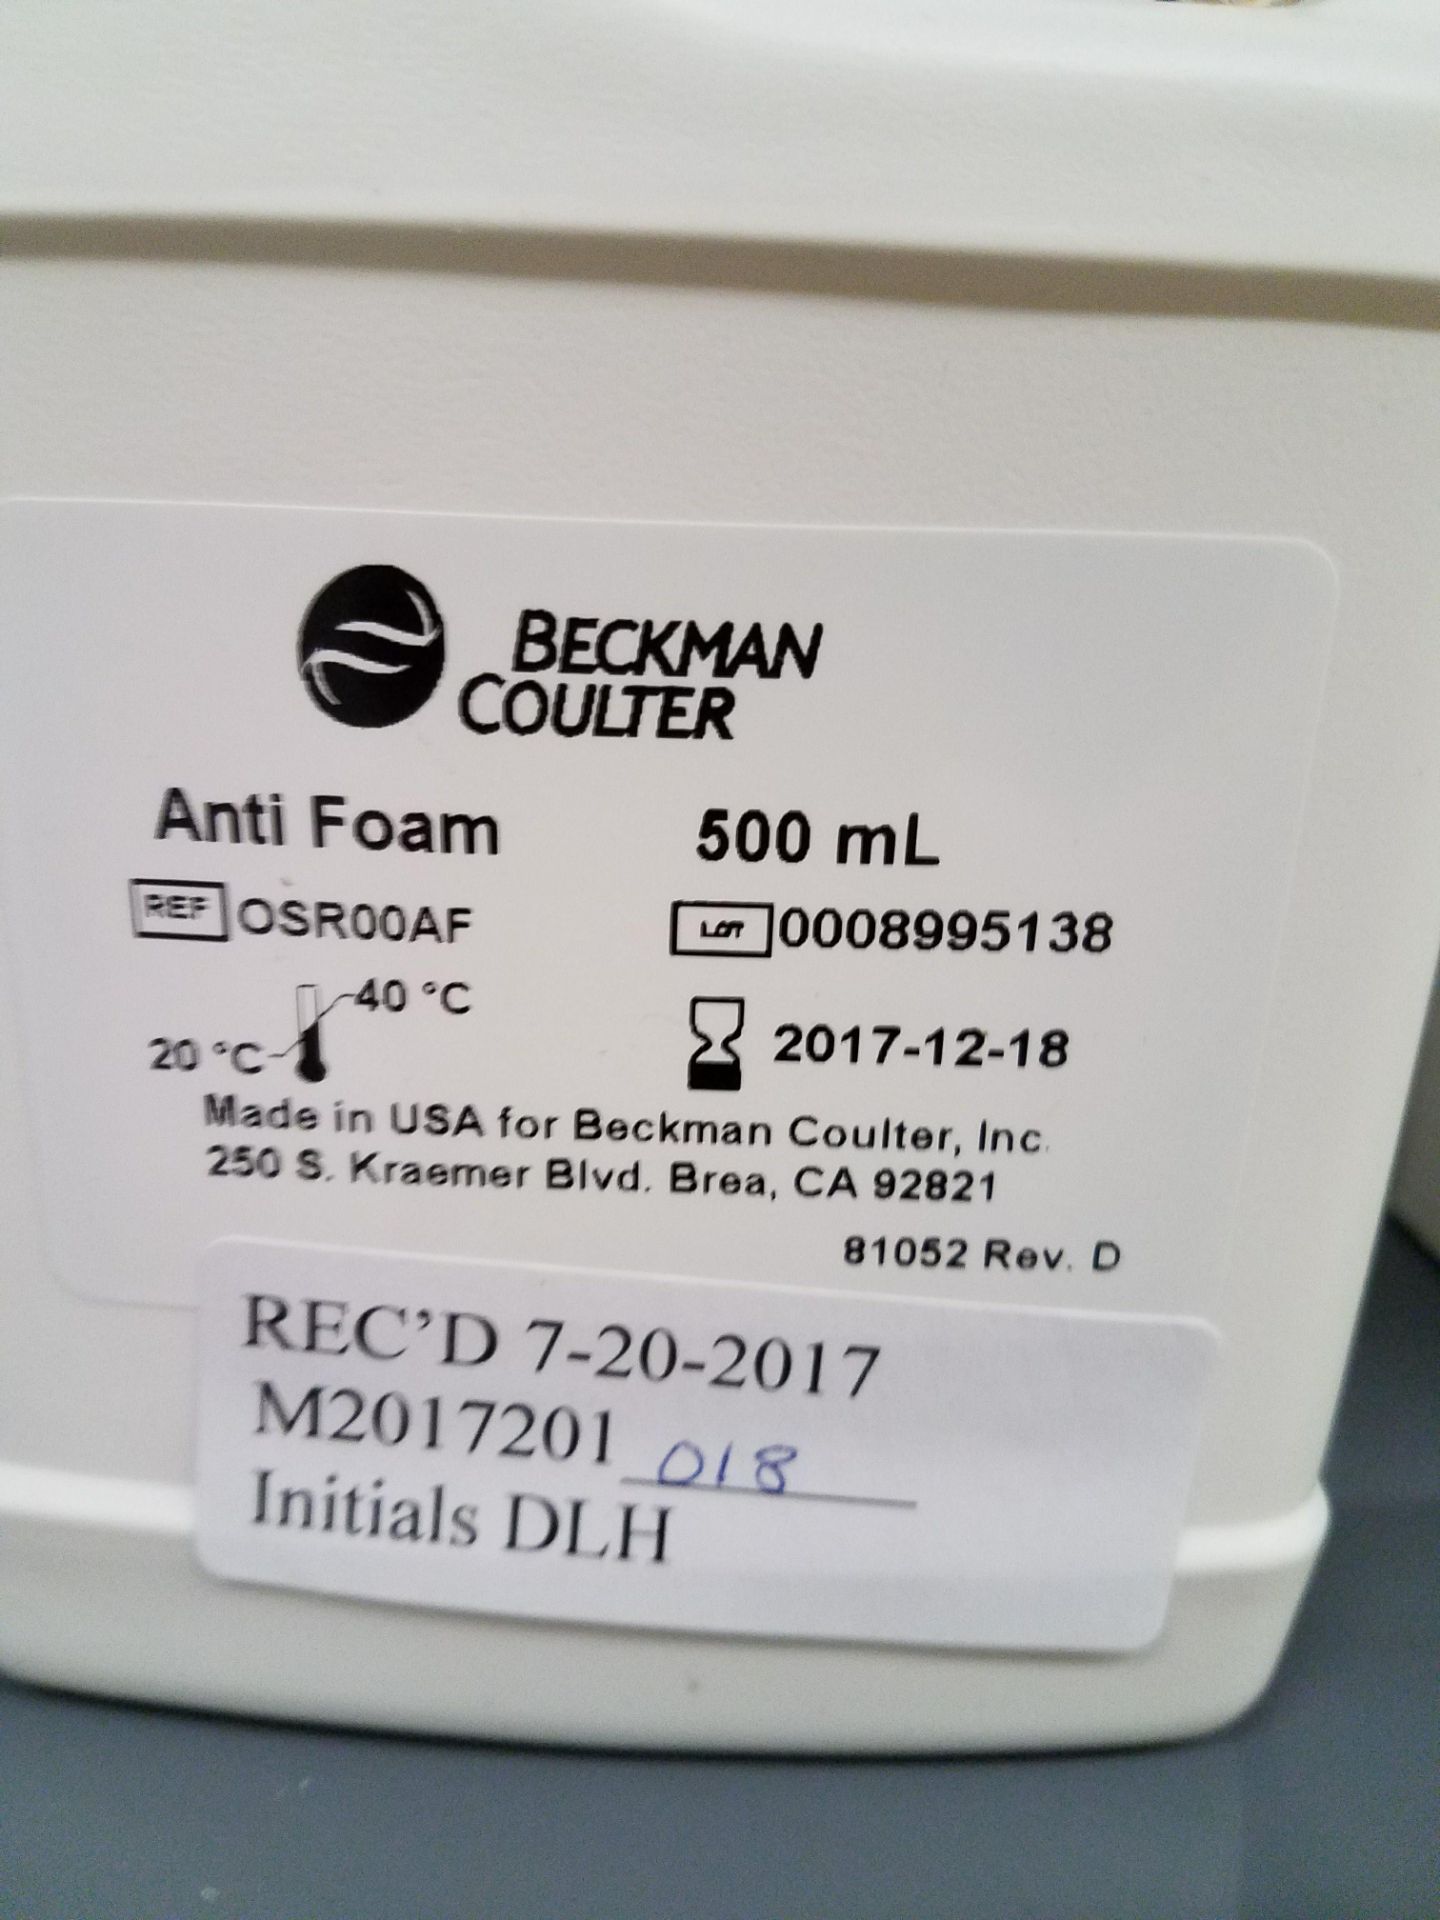 3 BOTTLES OF BECKMAN COULTER 500ML ANTI FOAM - Image 3 of 3